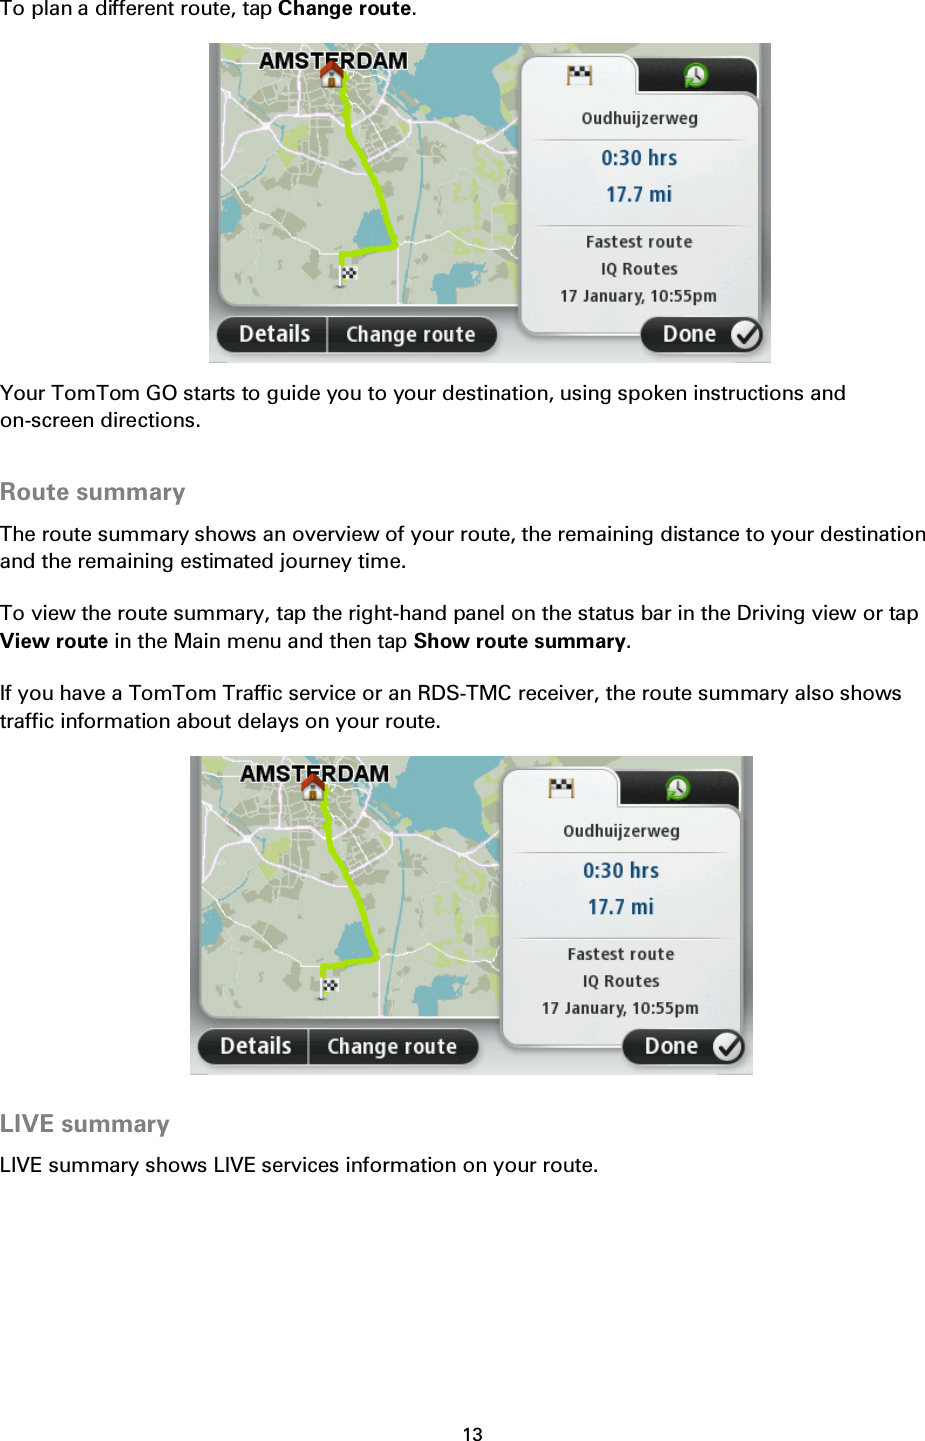 13    To plan a different route, tap Change route.  Your TomTom GO starts to guide you to your destination, using spoken instructions and on-screen directions.  Route summary The route summary shows an overview of your route, the remaining distance to your destination and the remaining estimated journey time. To view the route summary, tap the right-hand panel on the status bar in the Driving view or tap View route in the Main menu and then tap Show route summary. If you have a TomTom Traffic service or an RDS-TMC receiver, the route summary also shows traffic information about delays on your route.   LIVE summary LIVE summary shows LIVE services information on your route. 